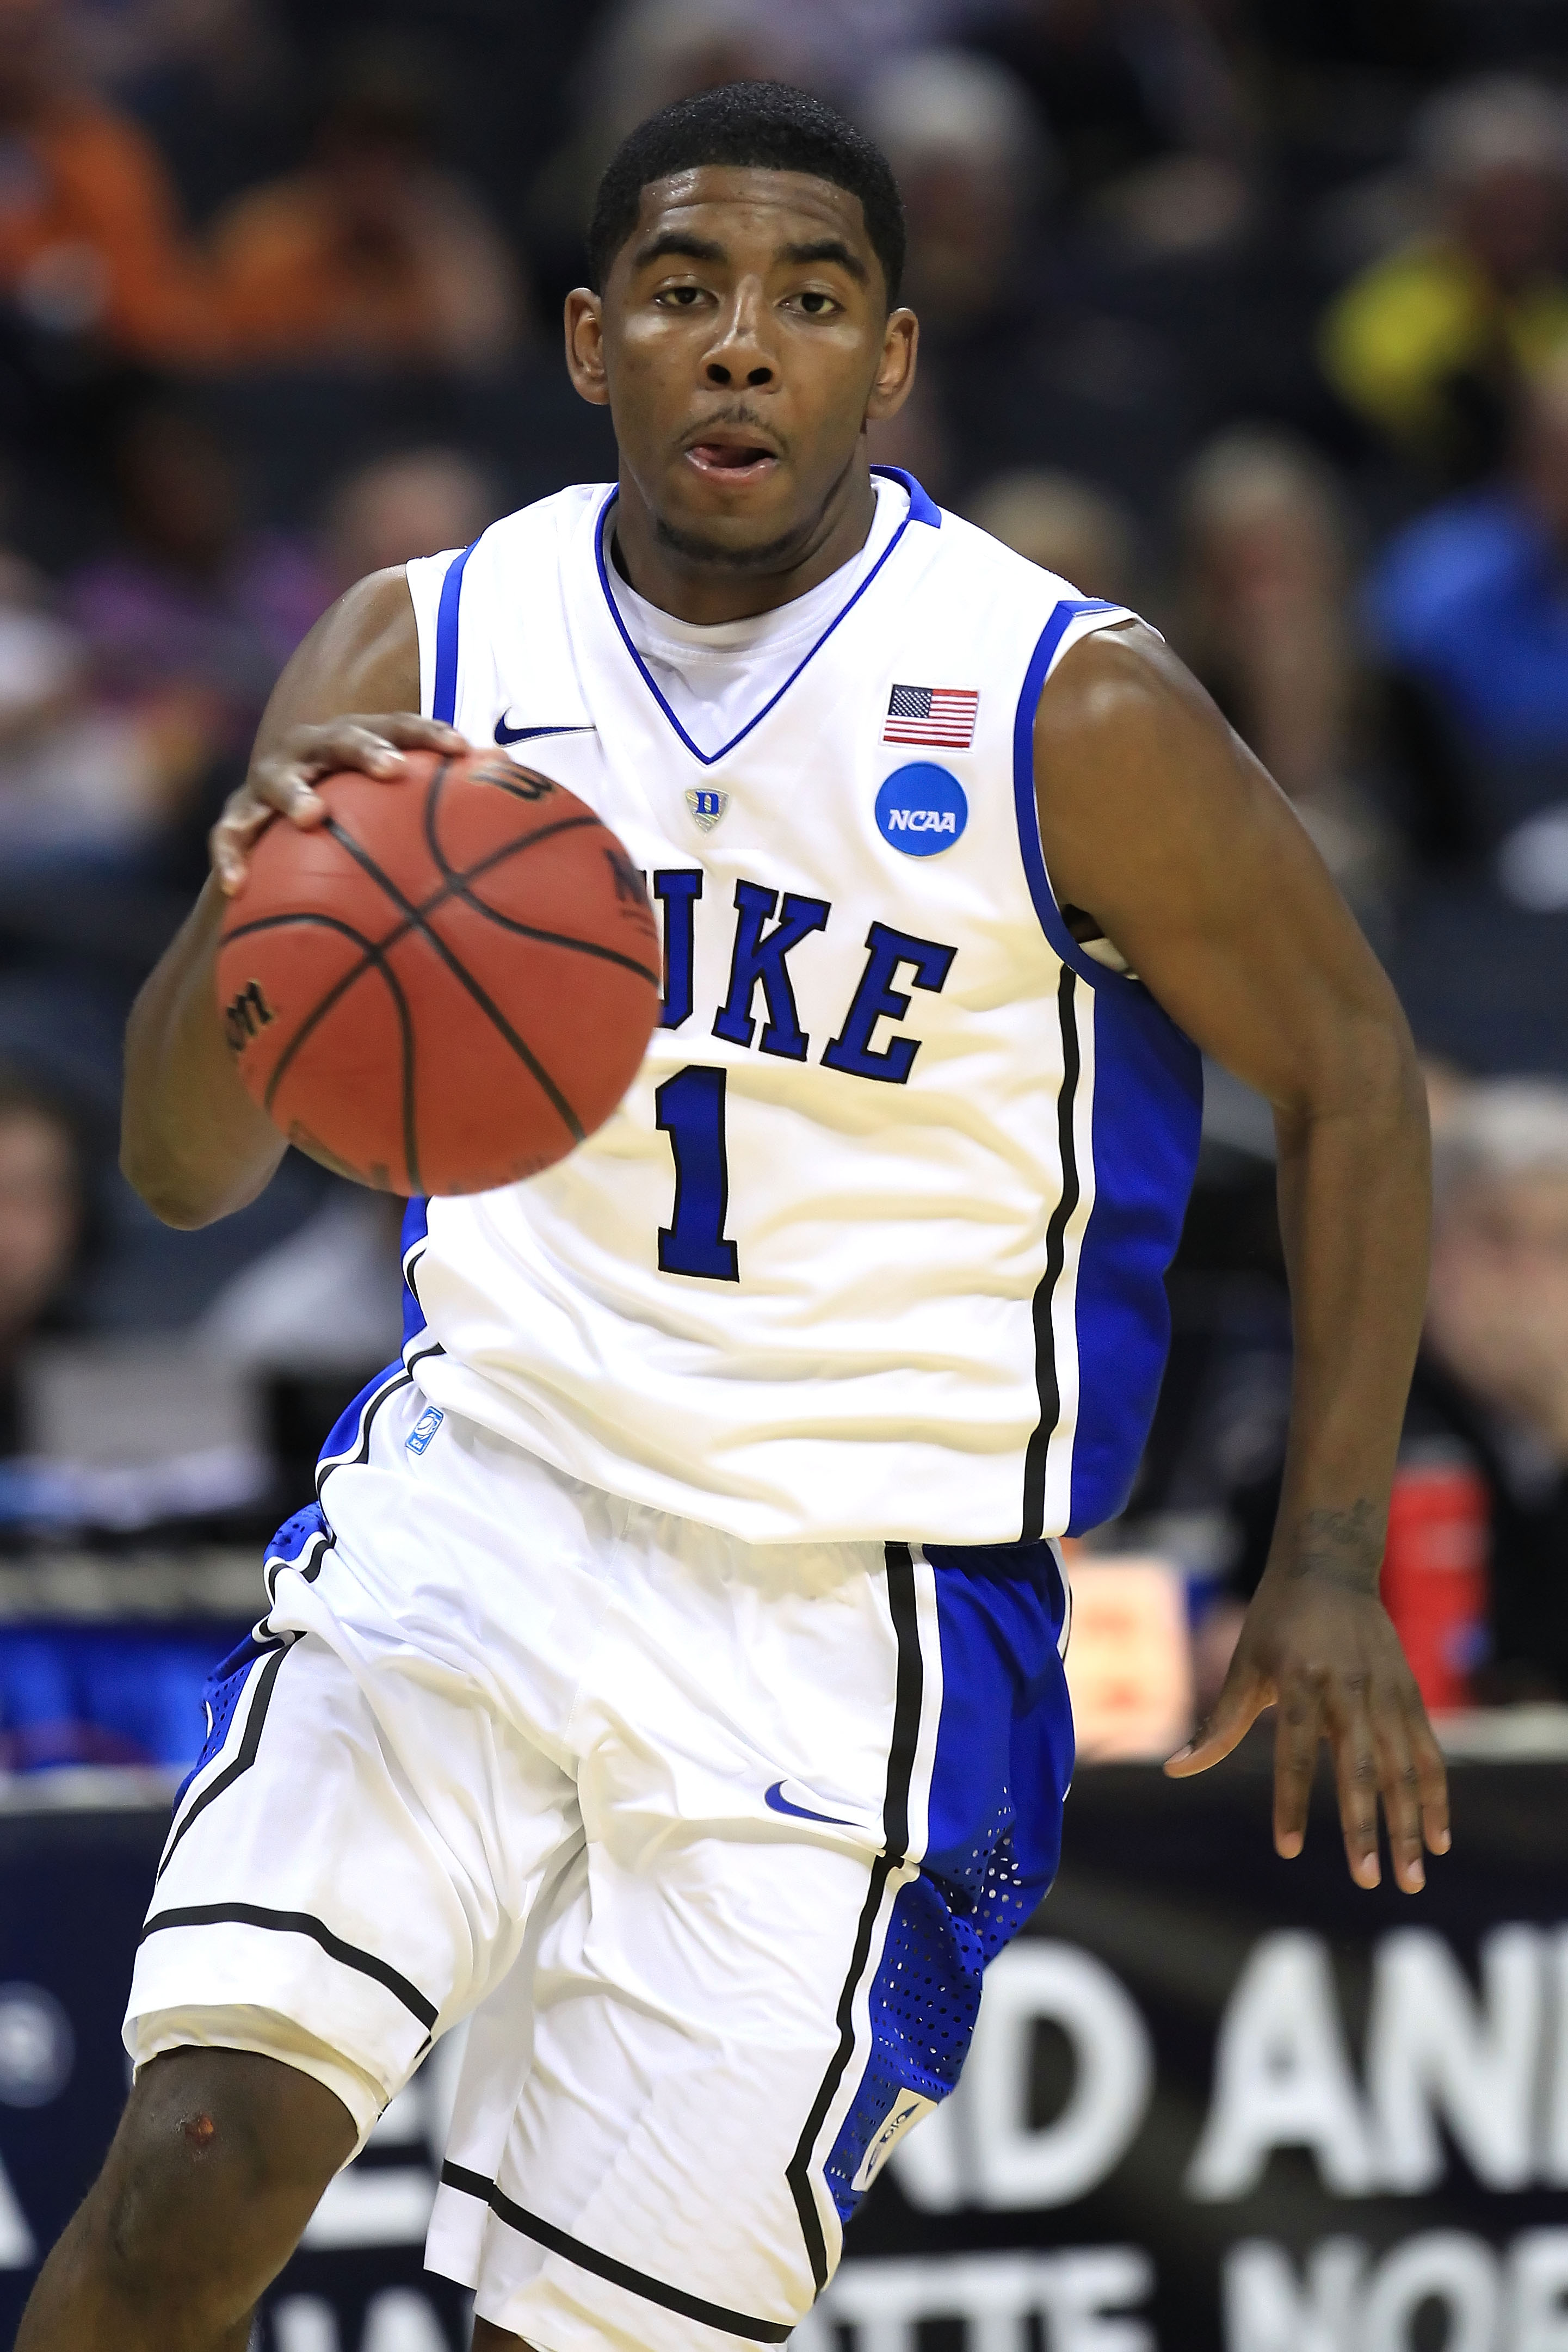 CHARLOTTE, NC - MARCH 18:  Kyrie Irving #1 of the Duke Blue Devils moves the ball in the second half while taking on the Hampton Pirates during the second round of the 2011 NCAA men's basketball tournament at Time Warner Cable Arena on March 18, 2011 in C